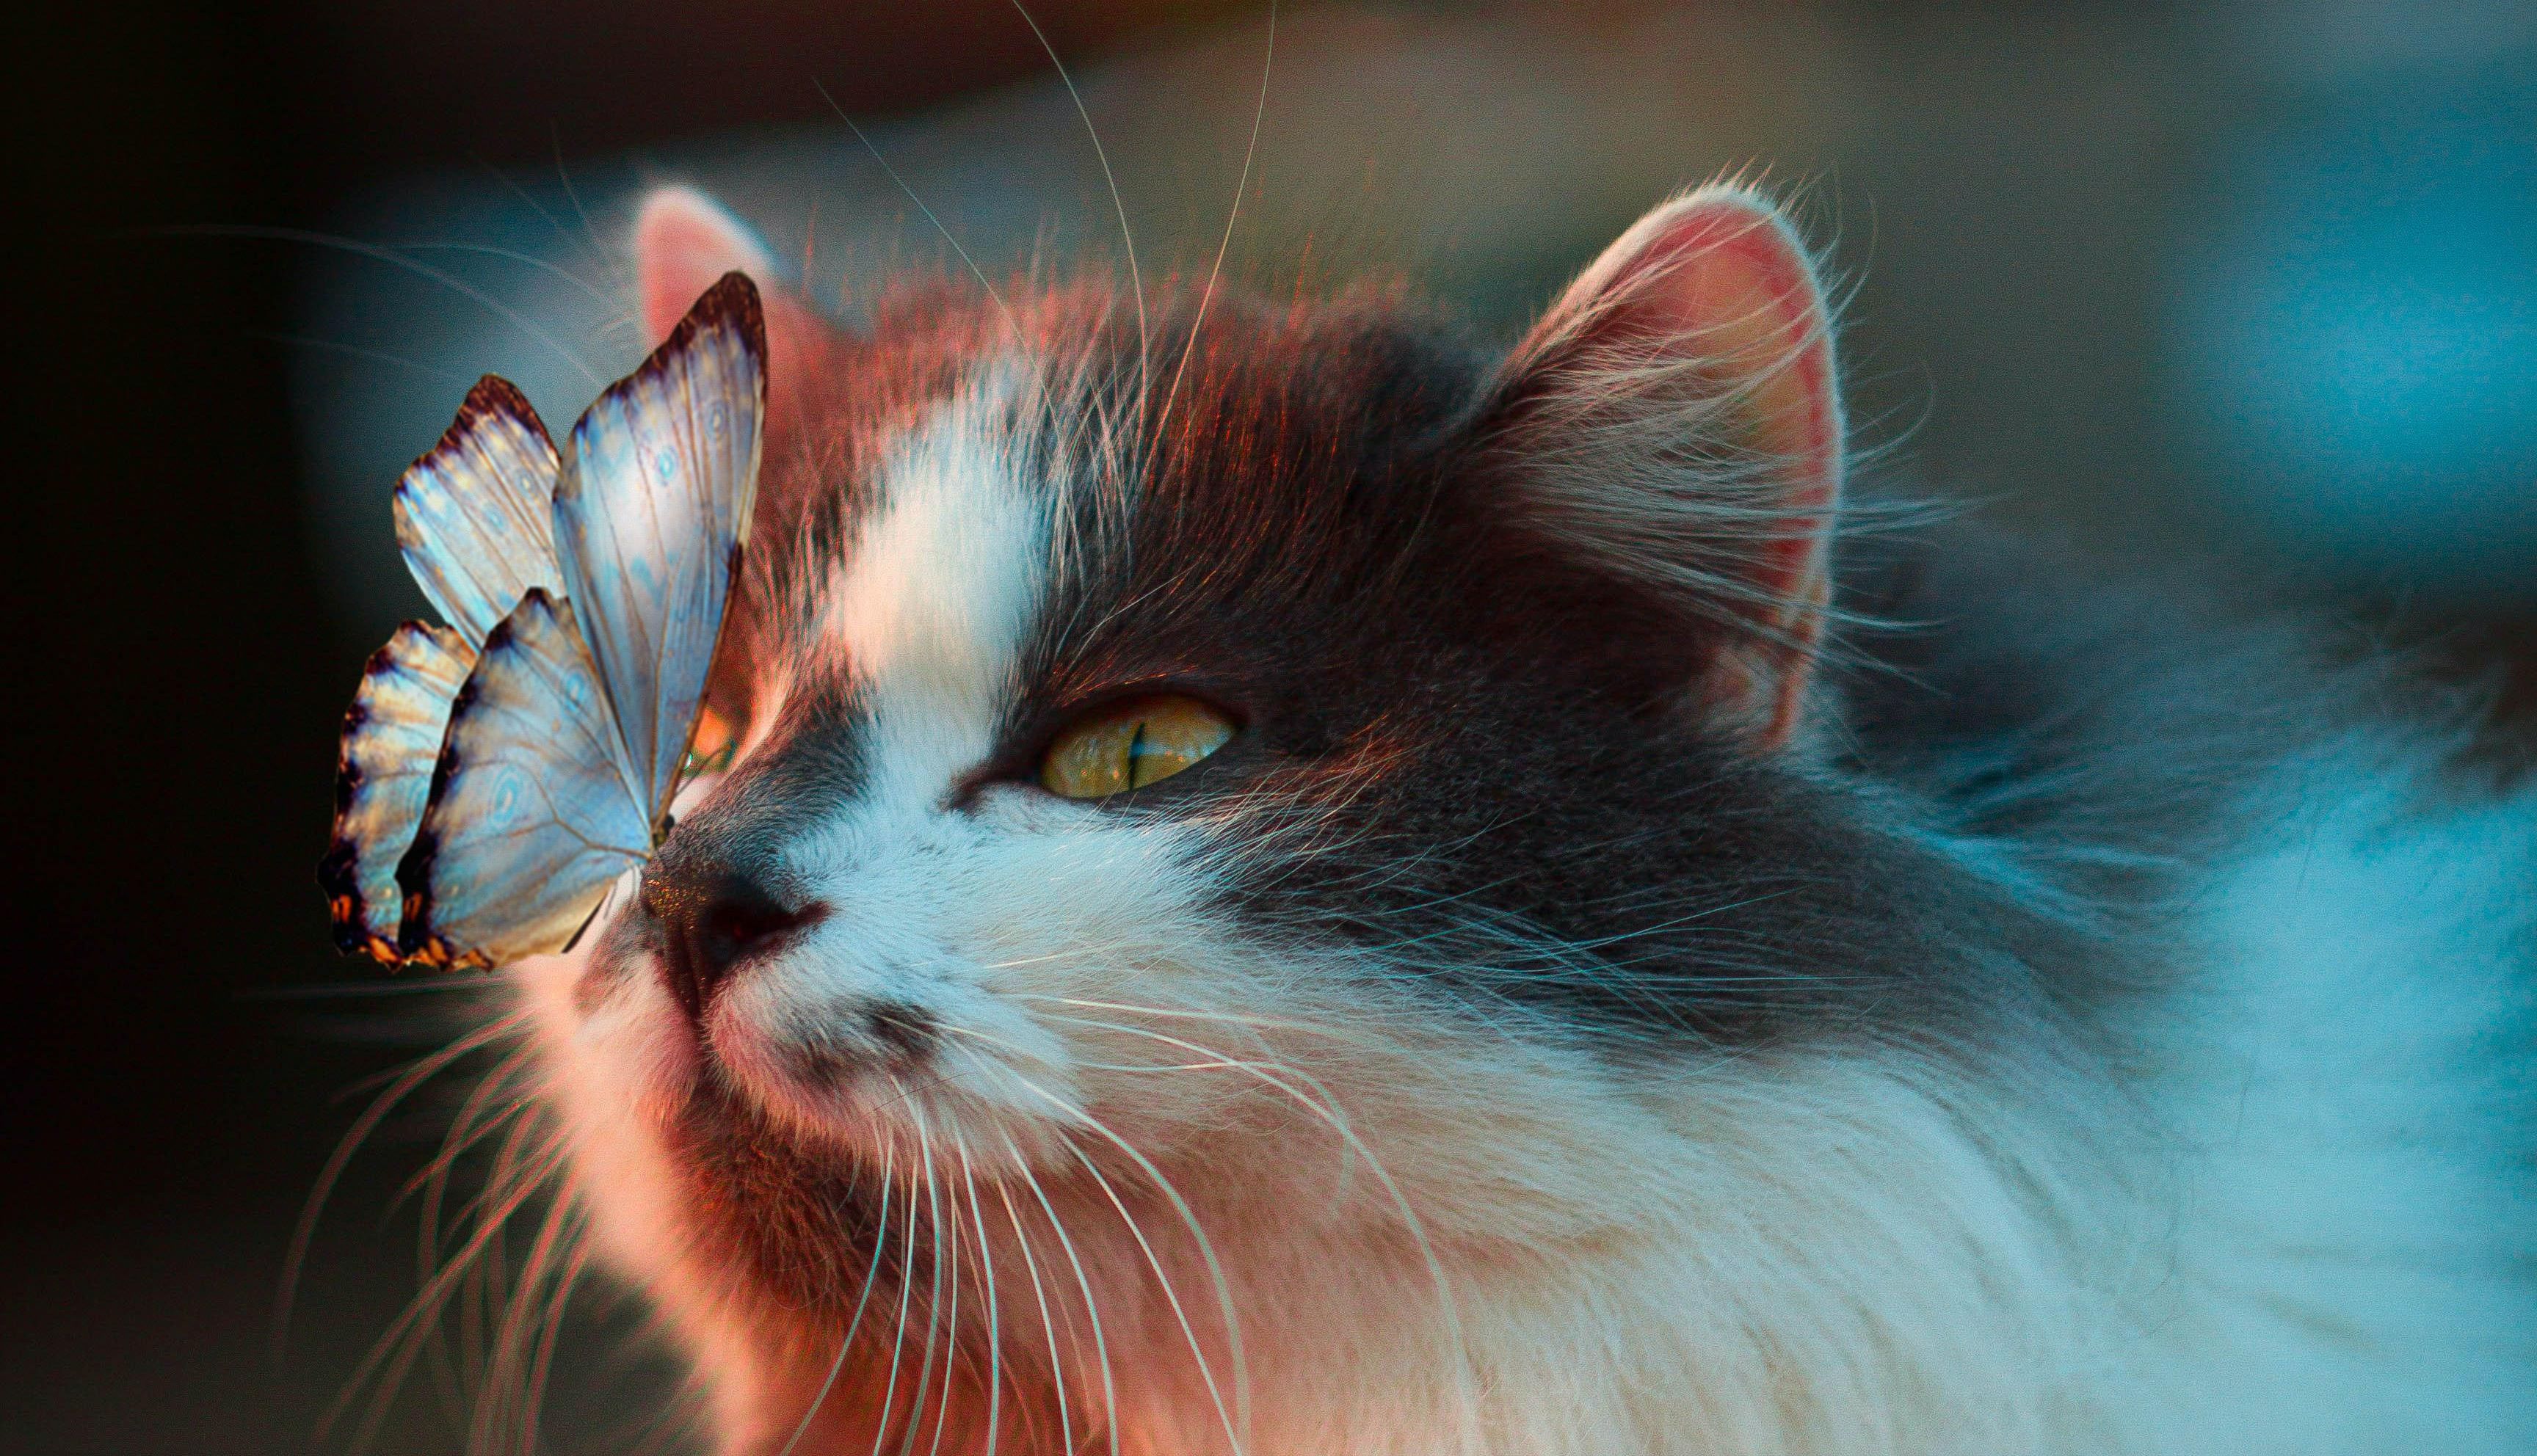 3 Profound Life Lessons That My Cat Has Taught Me About Being Human